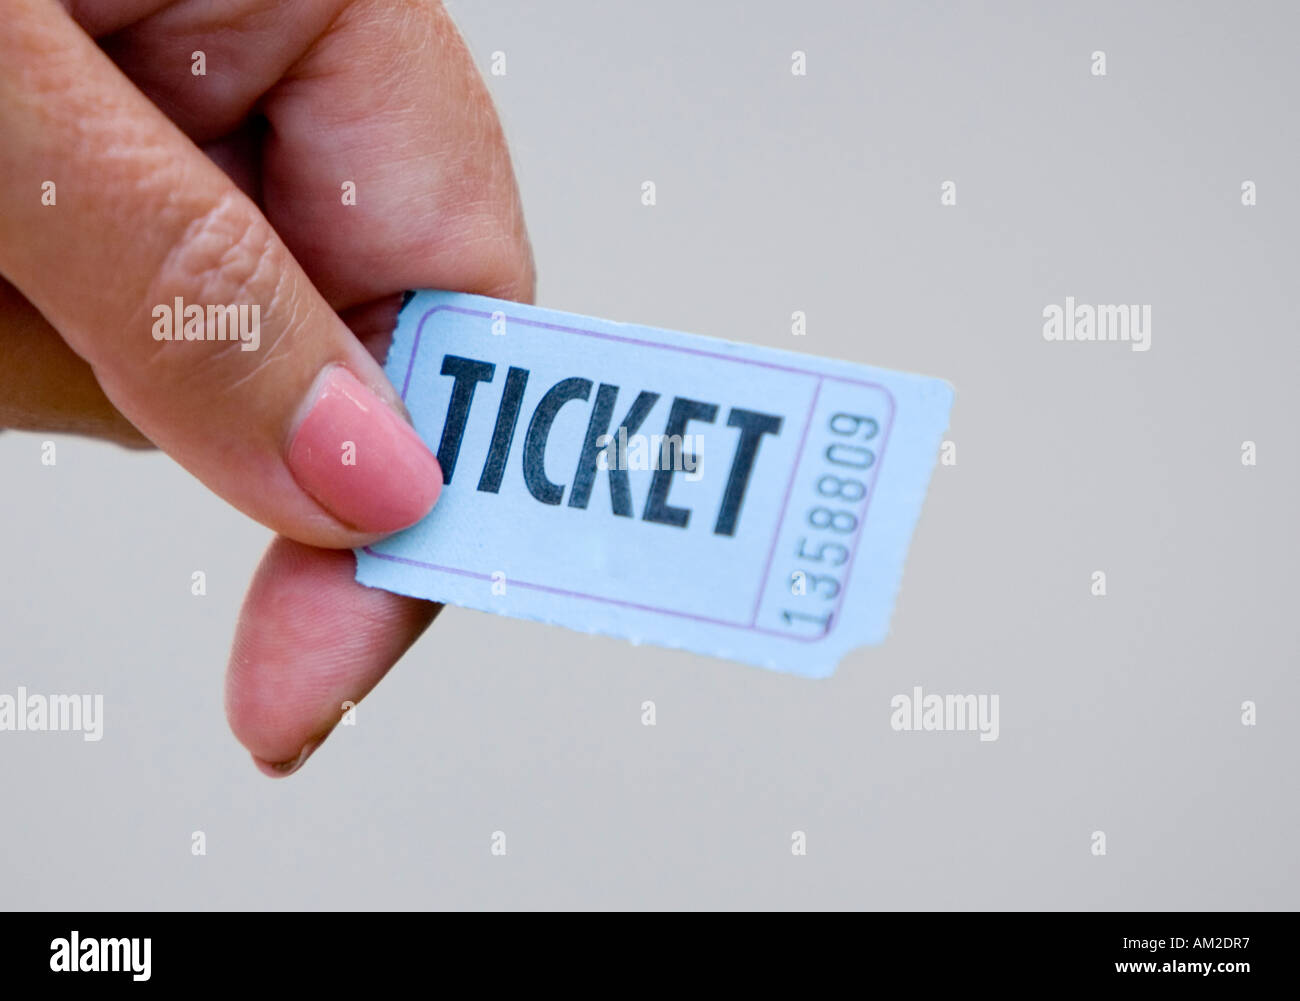 Woman holding a ticket Stock Photo